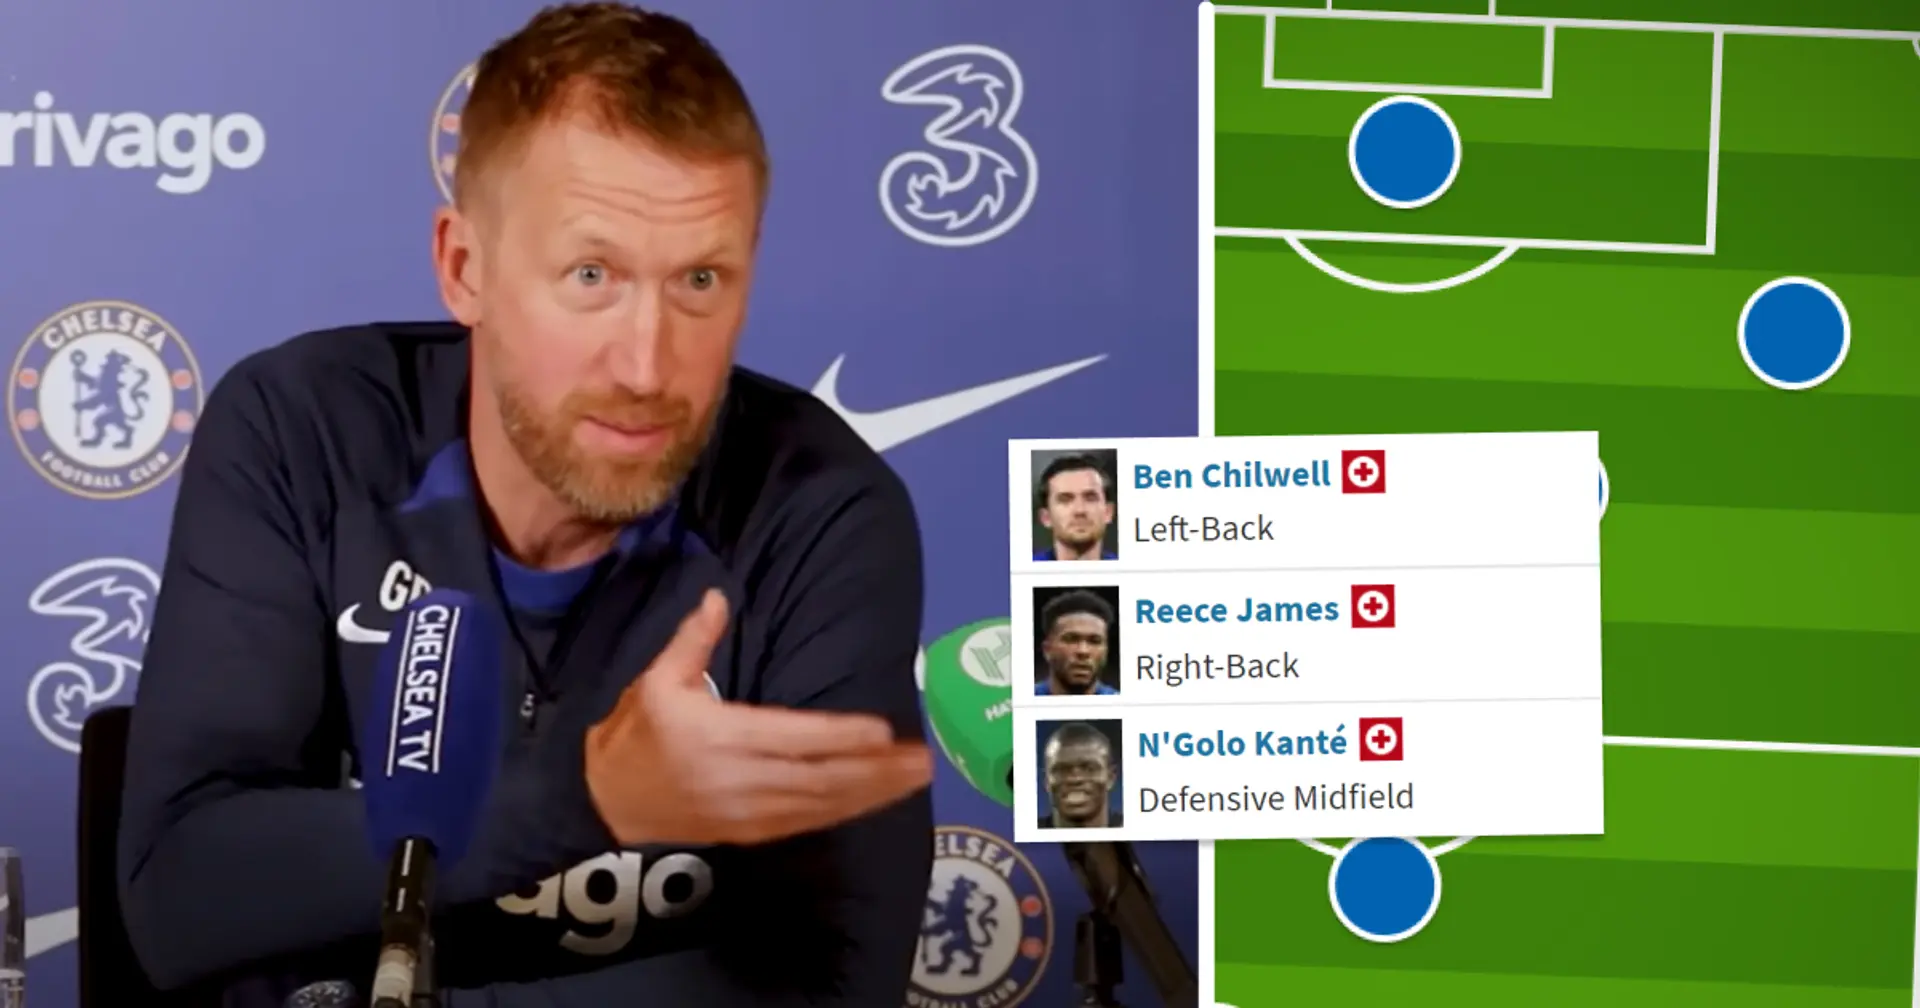 What Chelsea's strongest XI will be with fully fit squad - shown in lineup